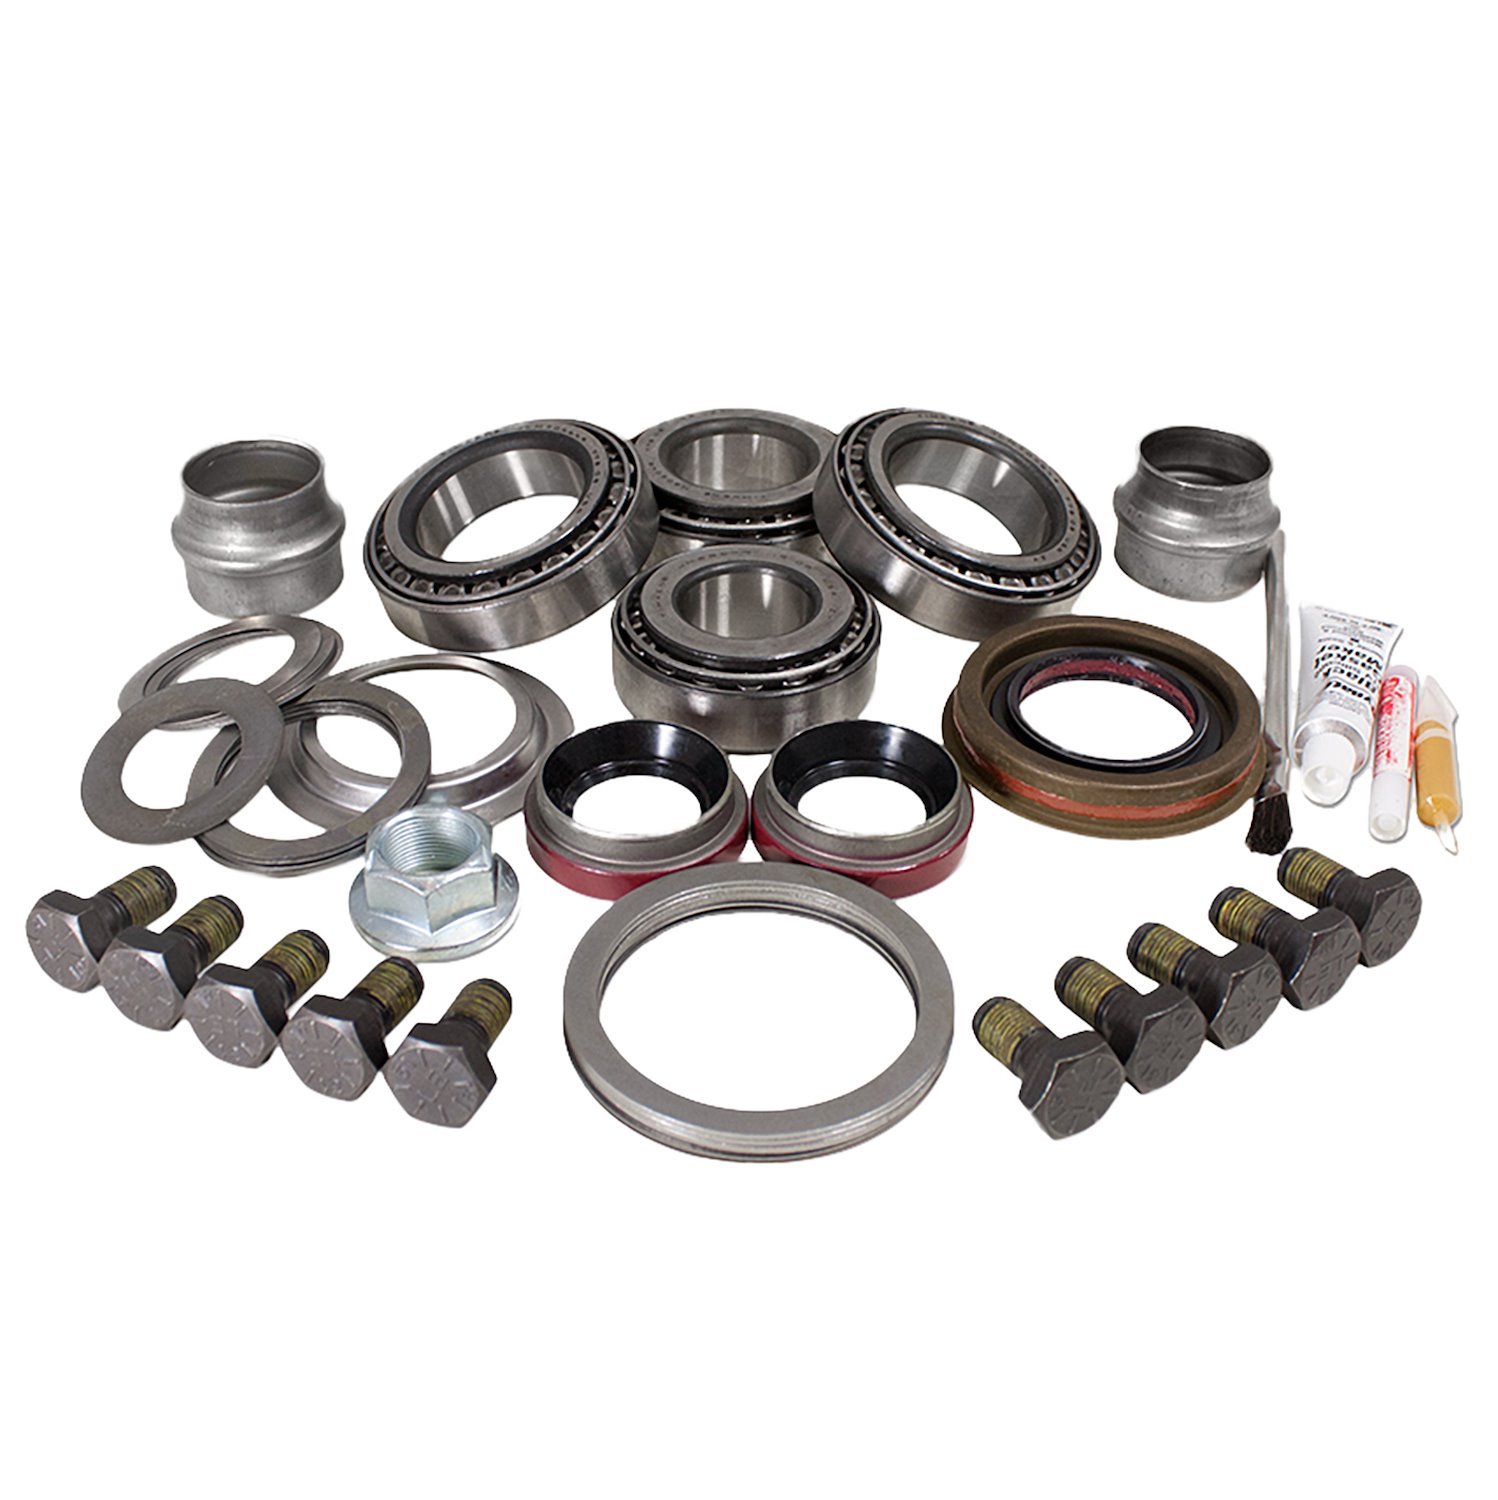 USA Standard 37012 Master Overhaul Kit, For The Dana 44 Jk Rubicon Front Differential